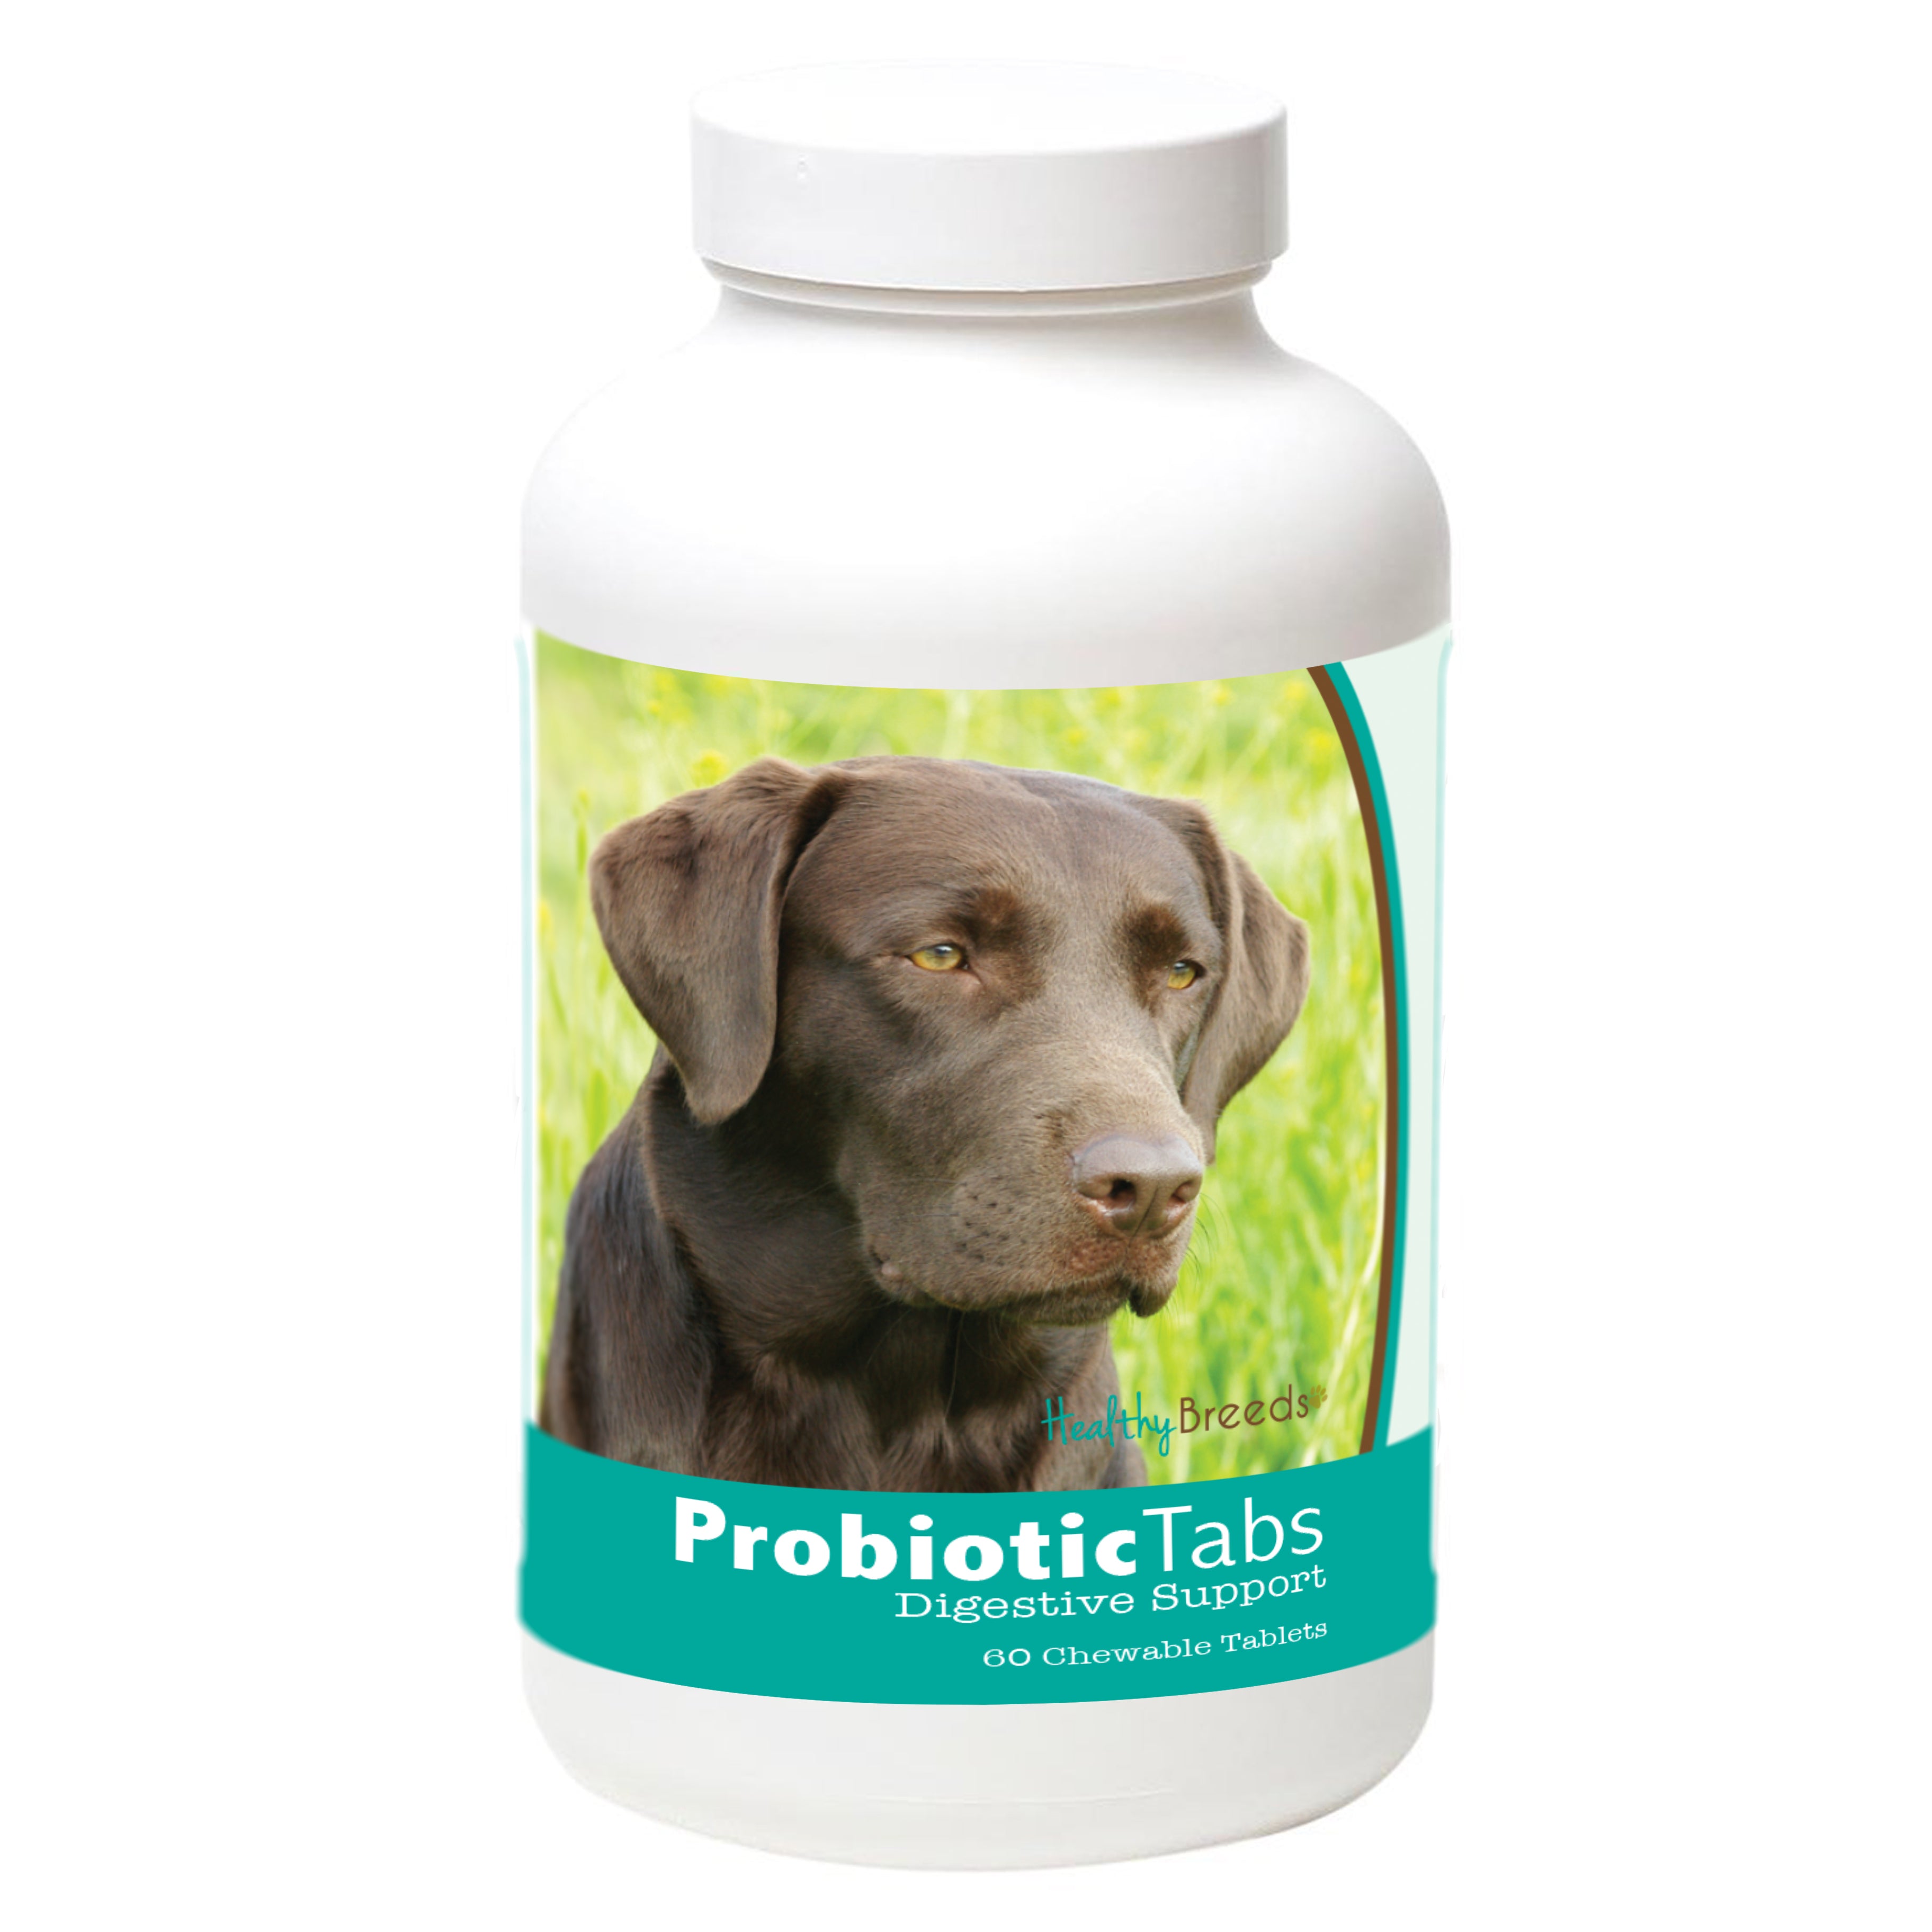 Labrador Retriever Probiotic and Digestive Support for Dogs 60 Count